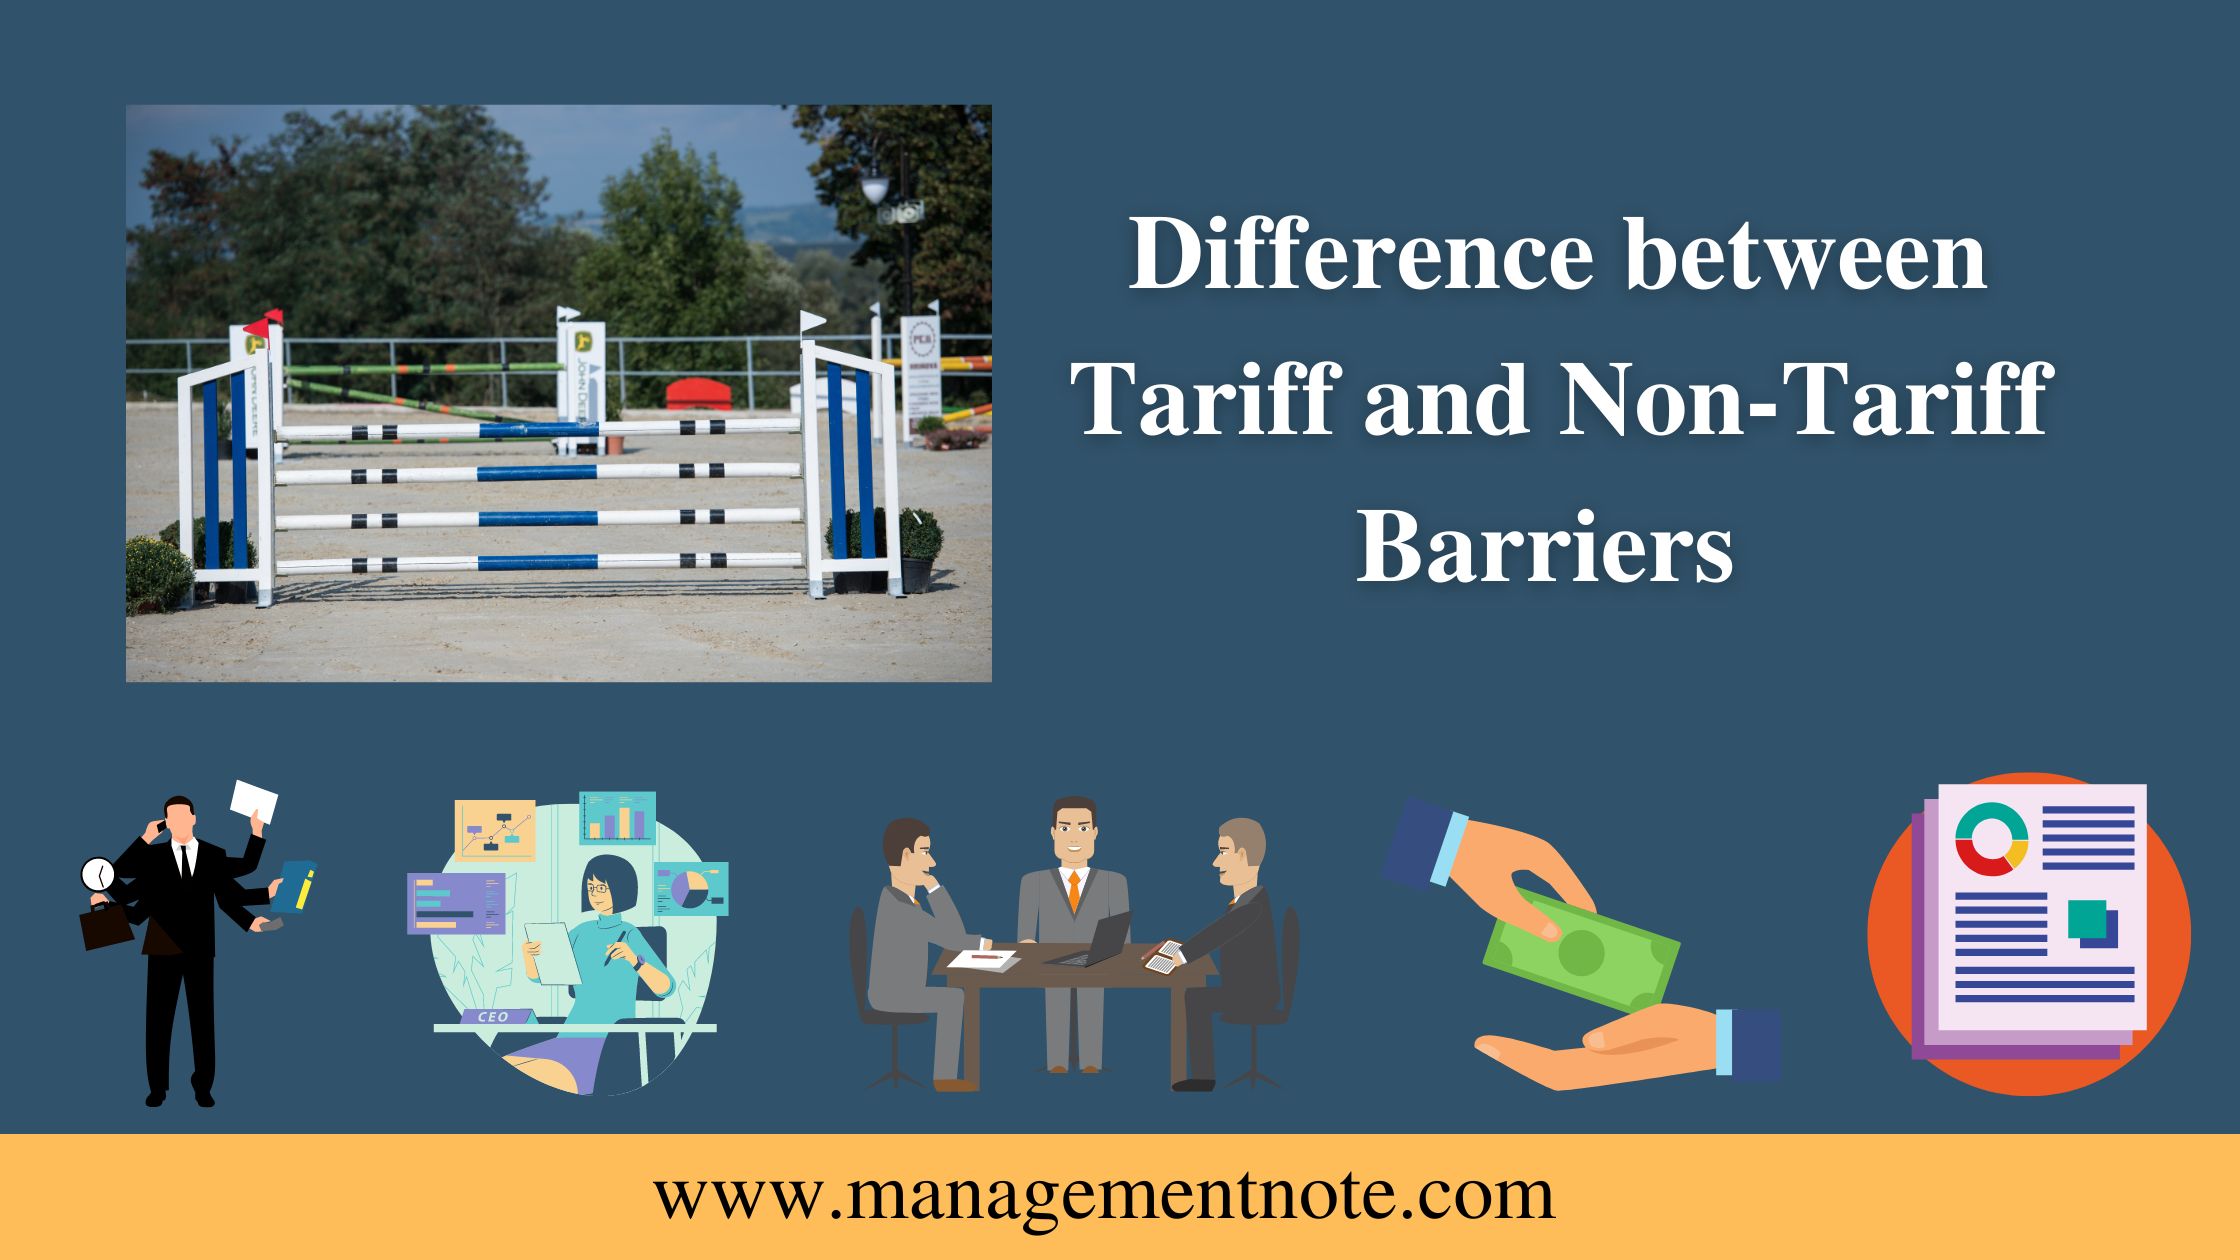 Difference between Tariff and Non-Tariff Barriers